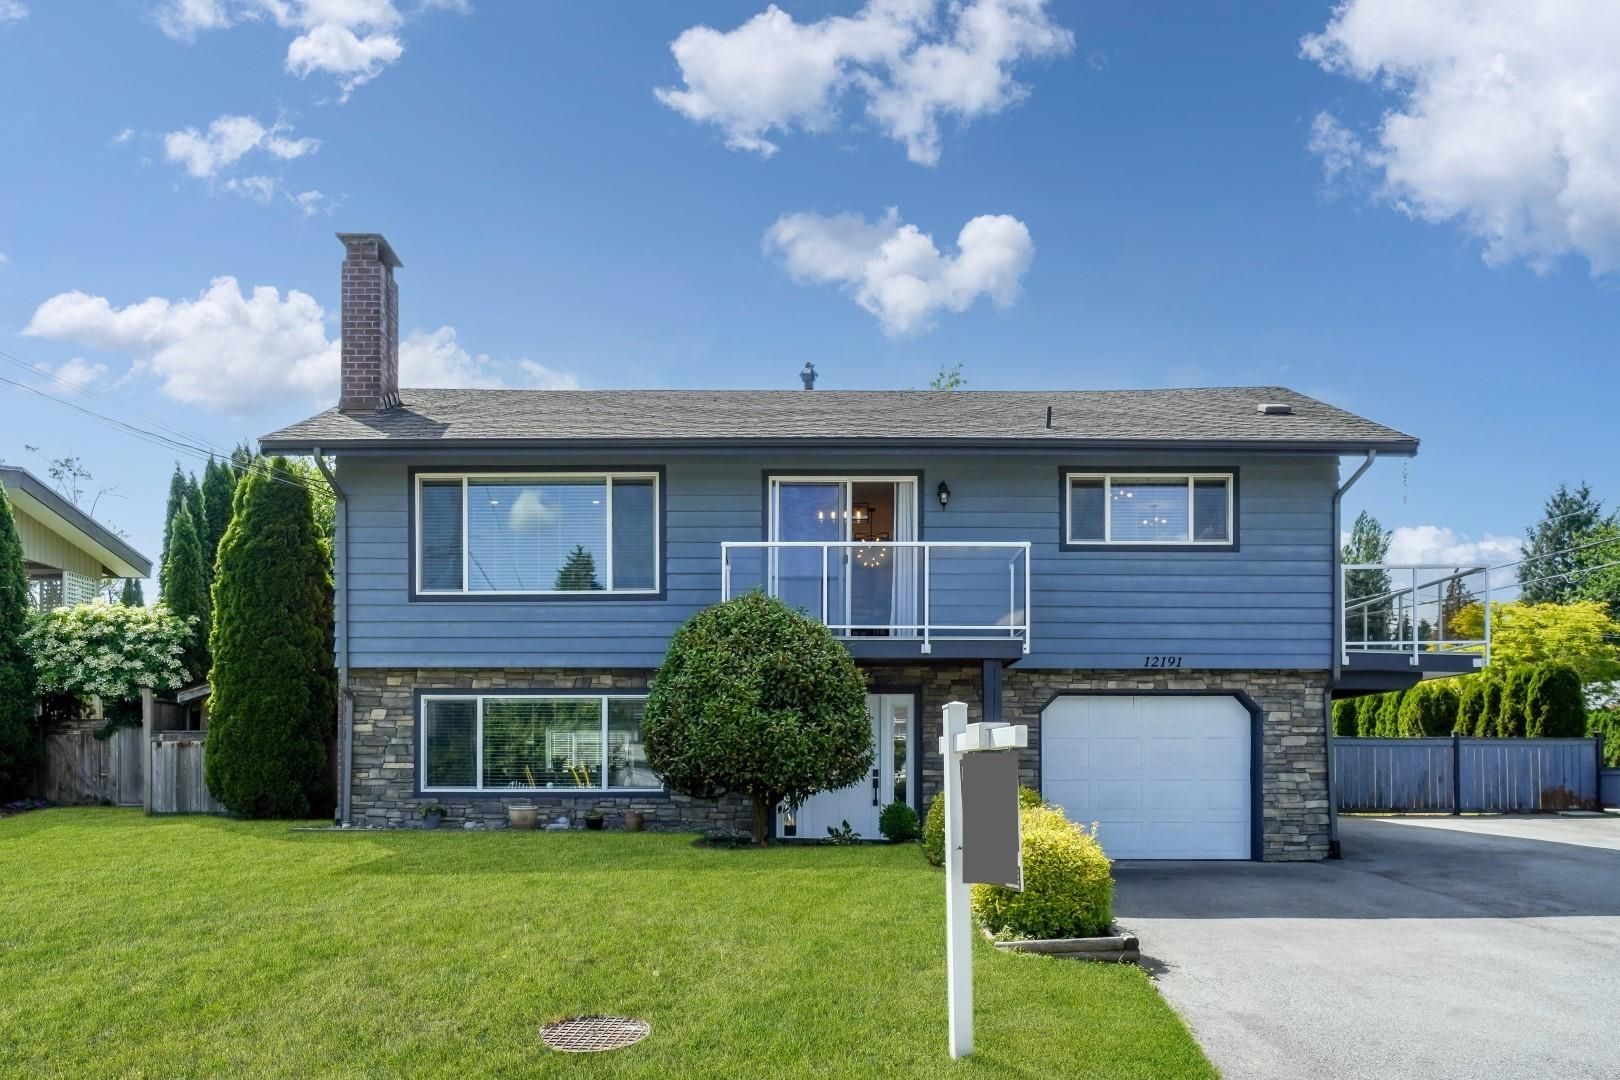 New property listed in West Central, Maple Ridge